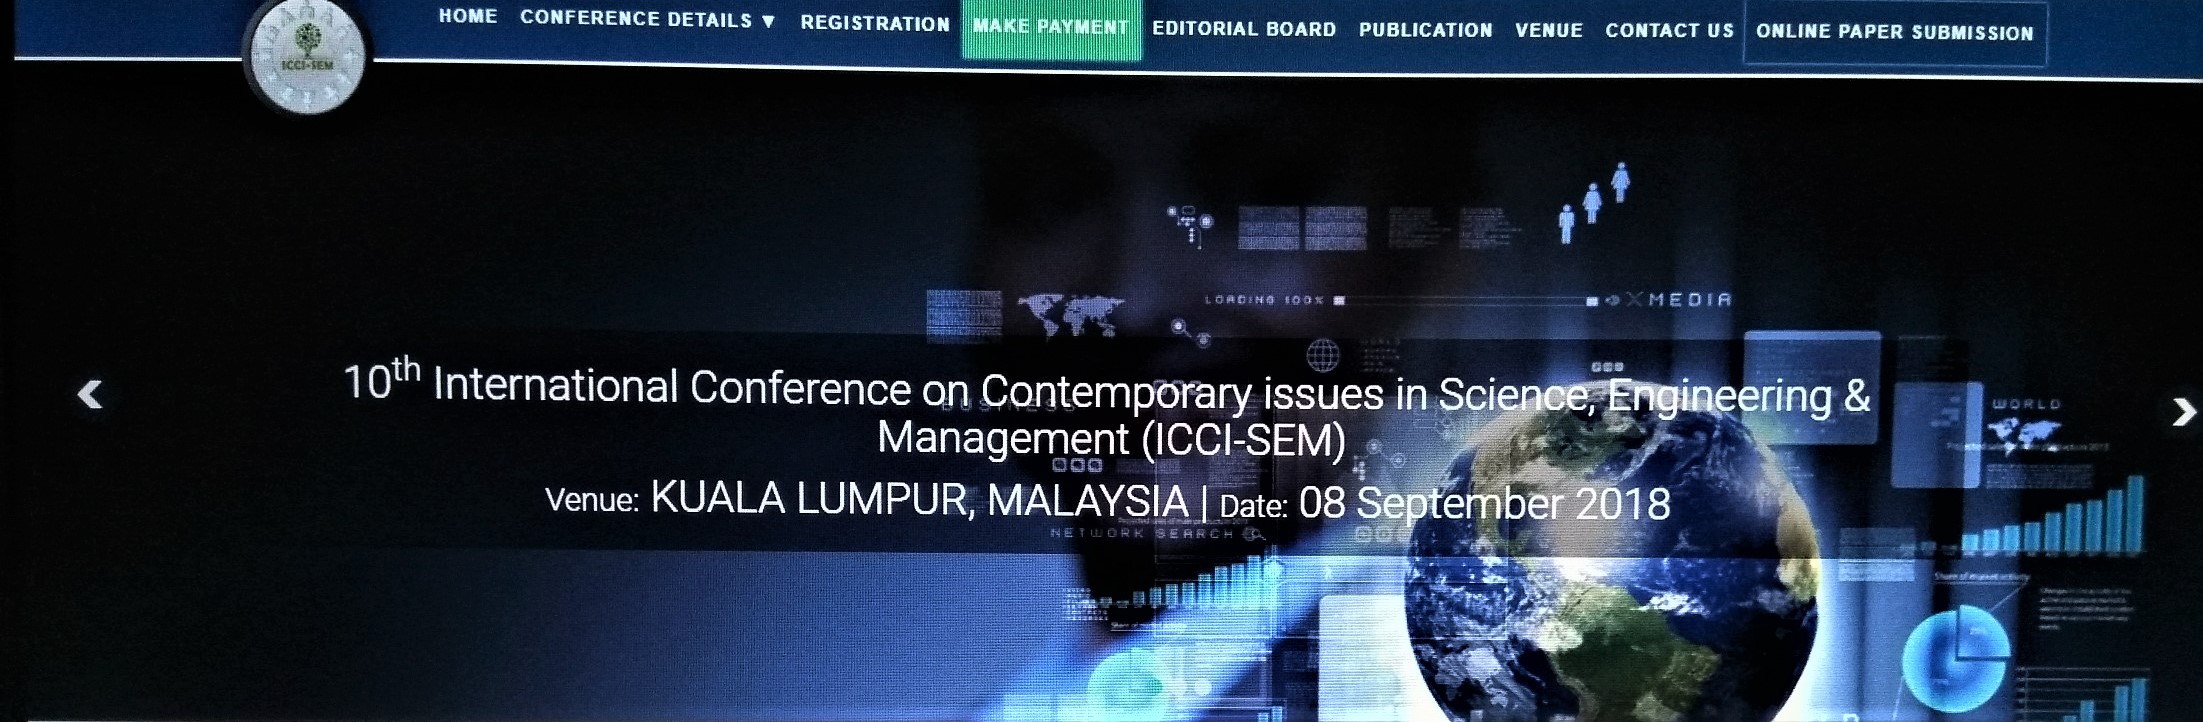 10th International Conference on Contemporary issues in Science, Engineering & Management (ICCI-SEM), Kuala Lumpur, Malaysia